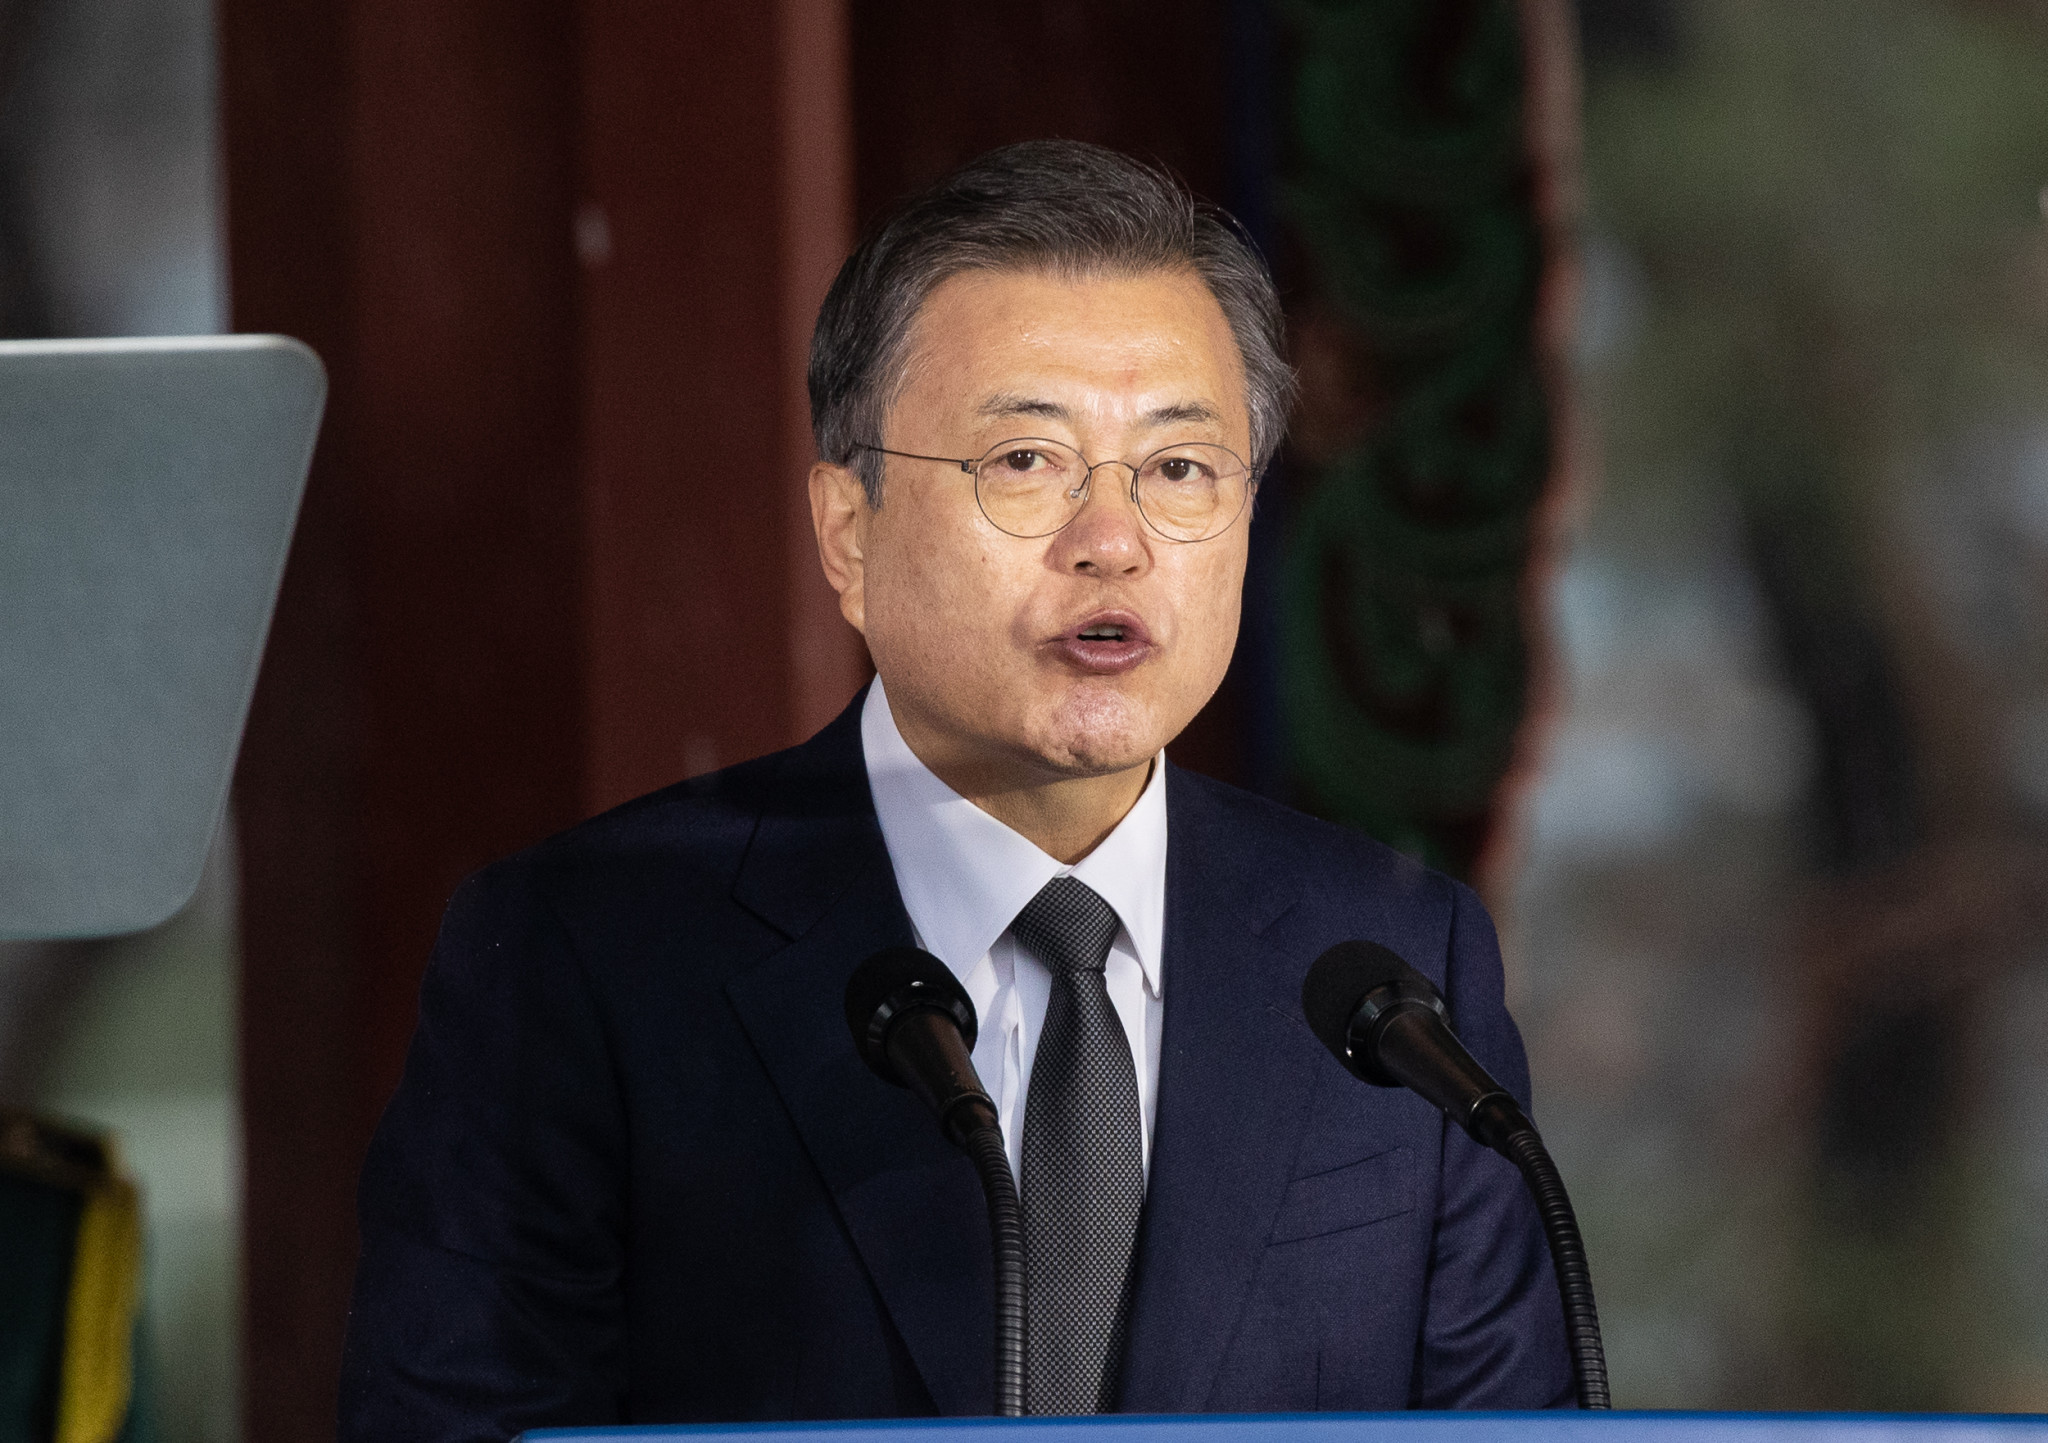 President Moon hopeful Tokyo 2020 will be opportunity for dialogue between North and South Korea